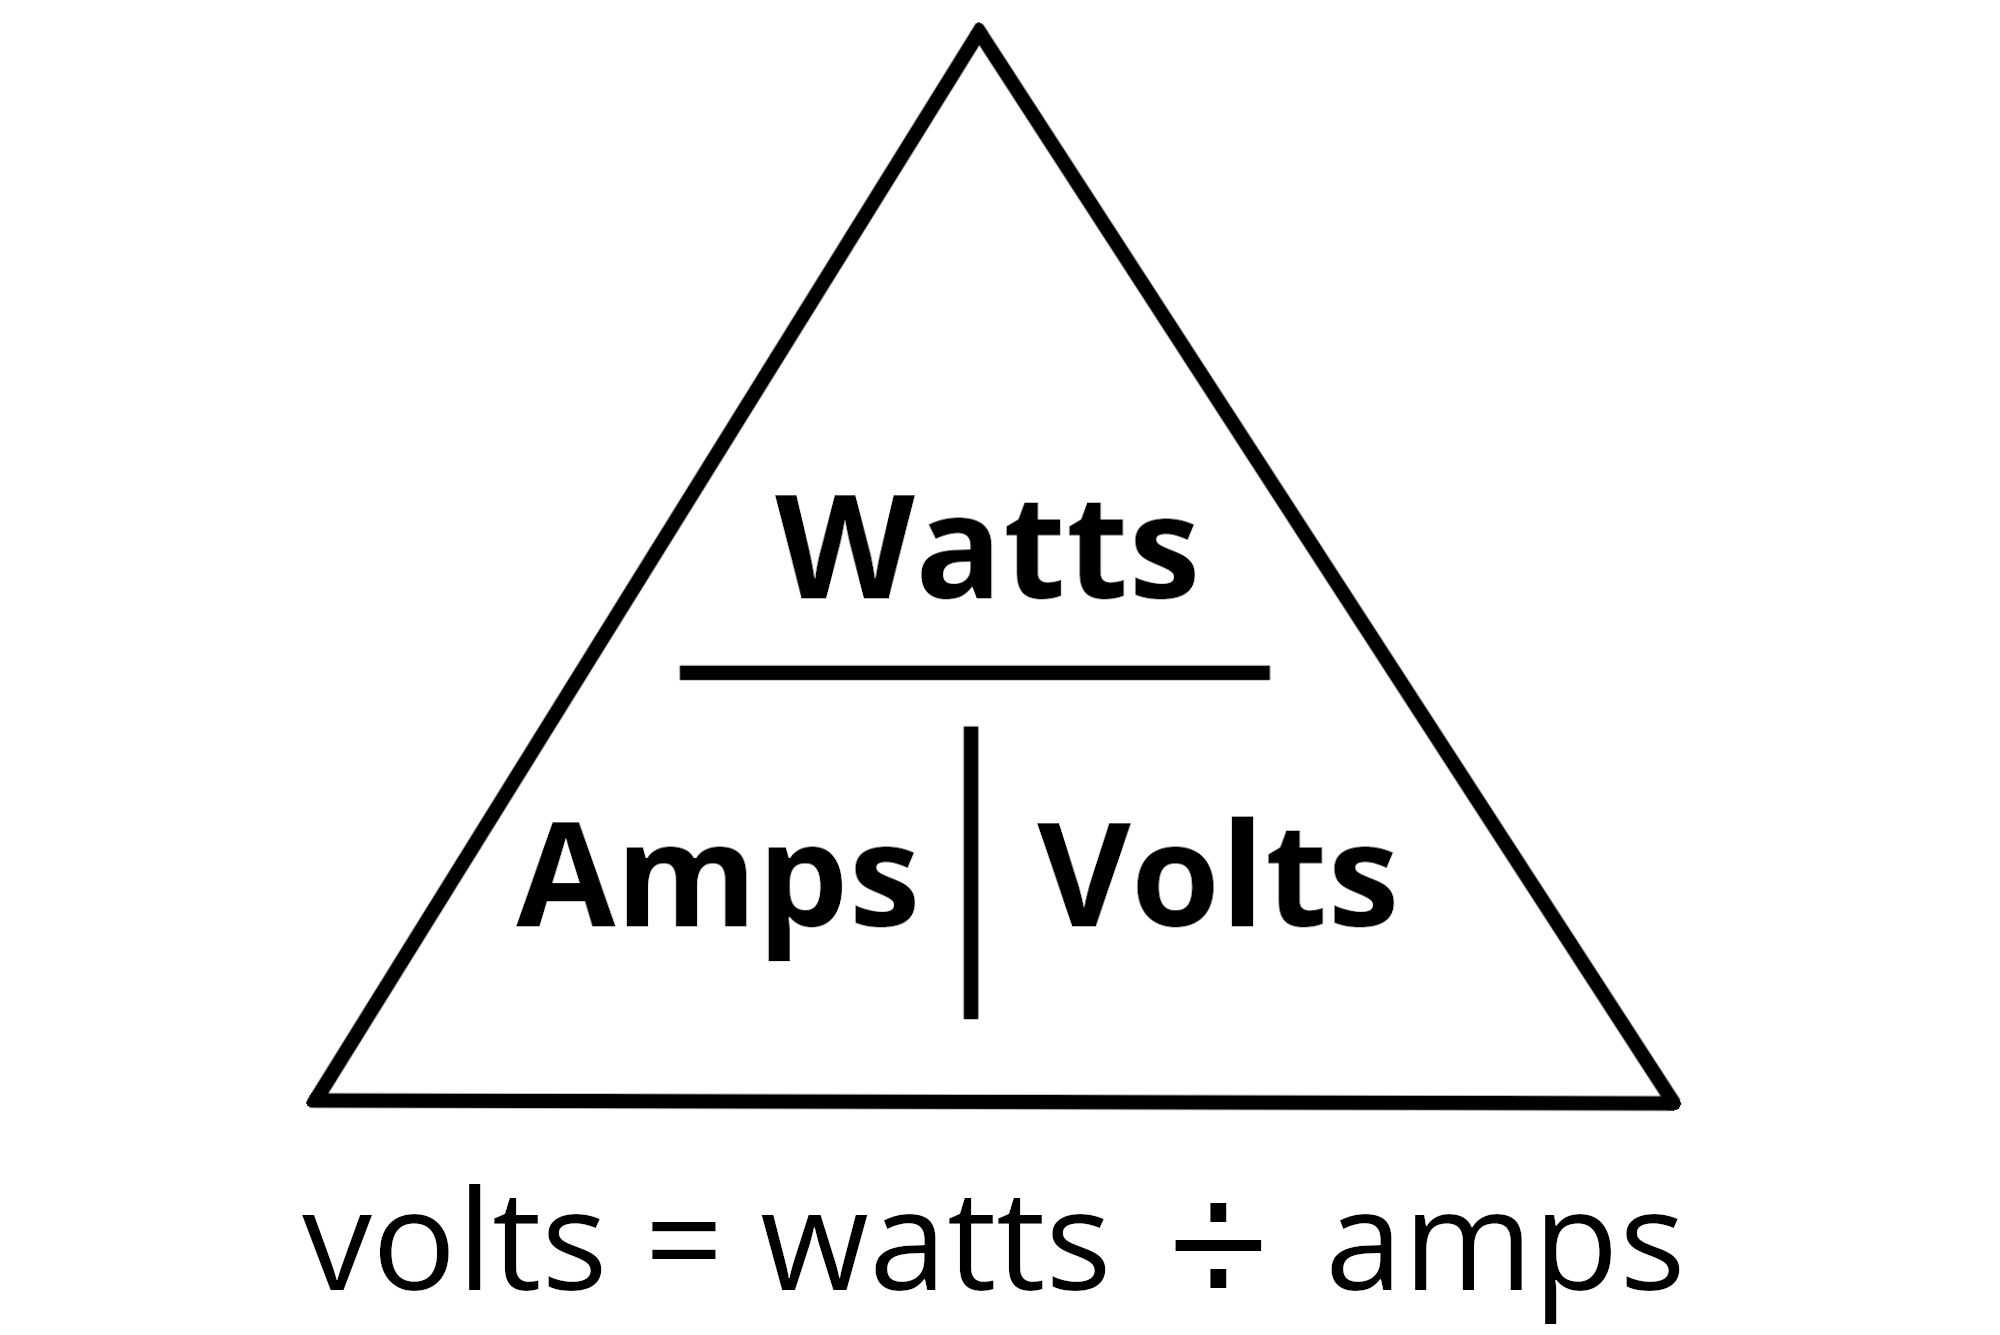 Power triangle illustrating the formula to convert amps to volts with volts being equal to watts divided by amps